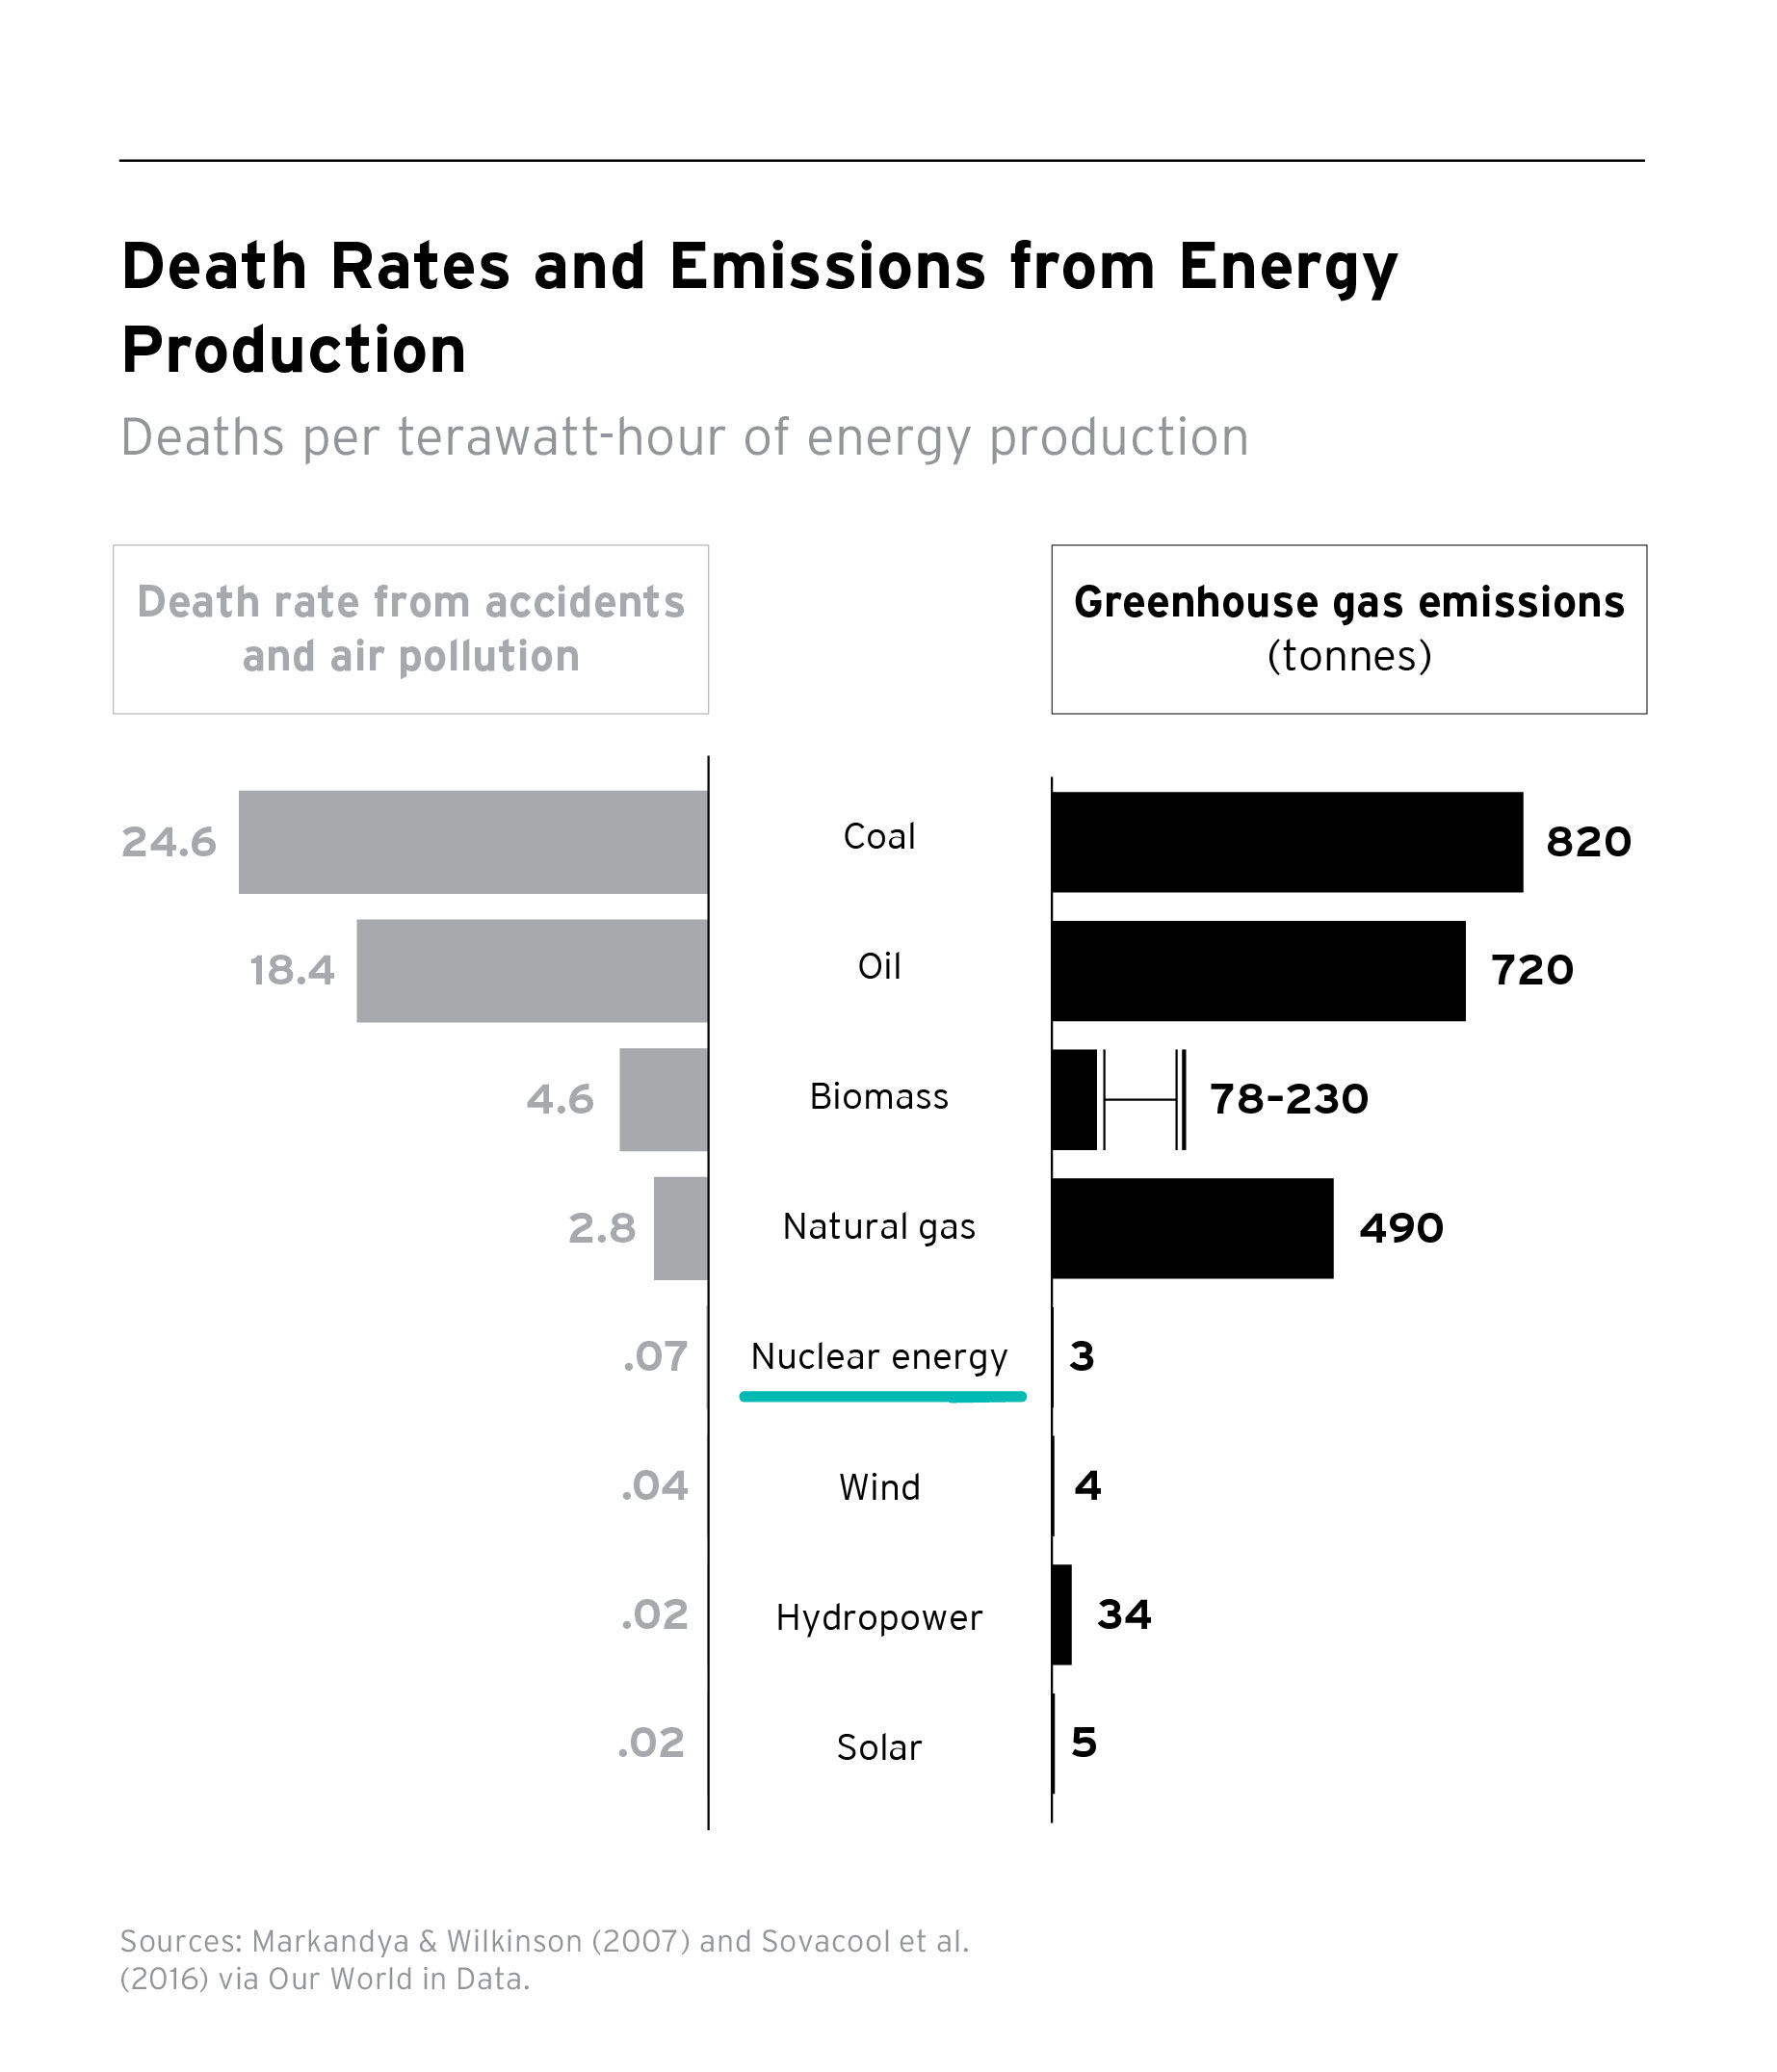 chart showing death rates and emissions from energy production